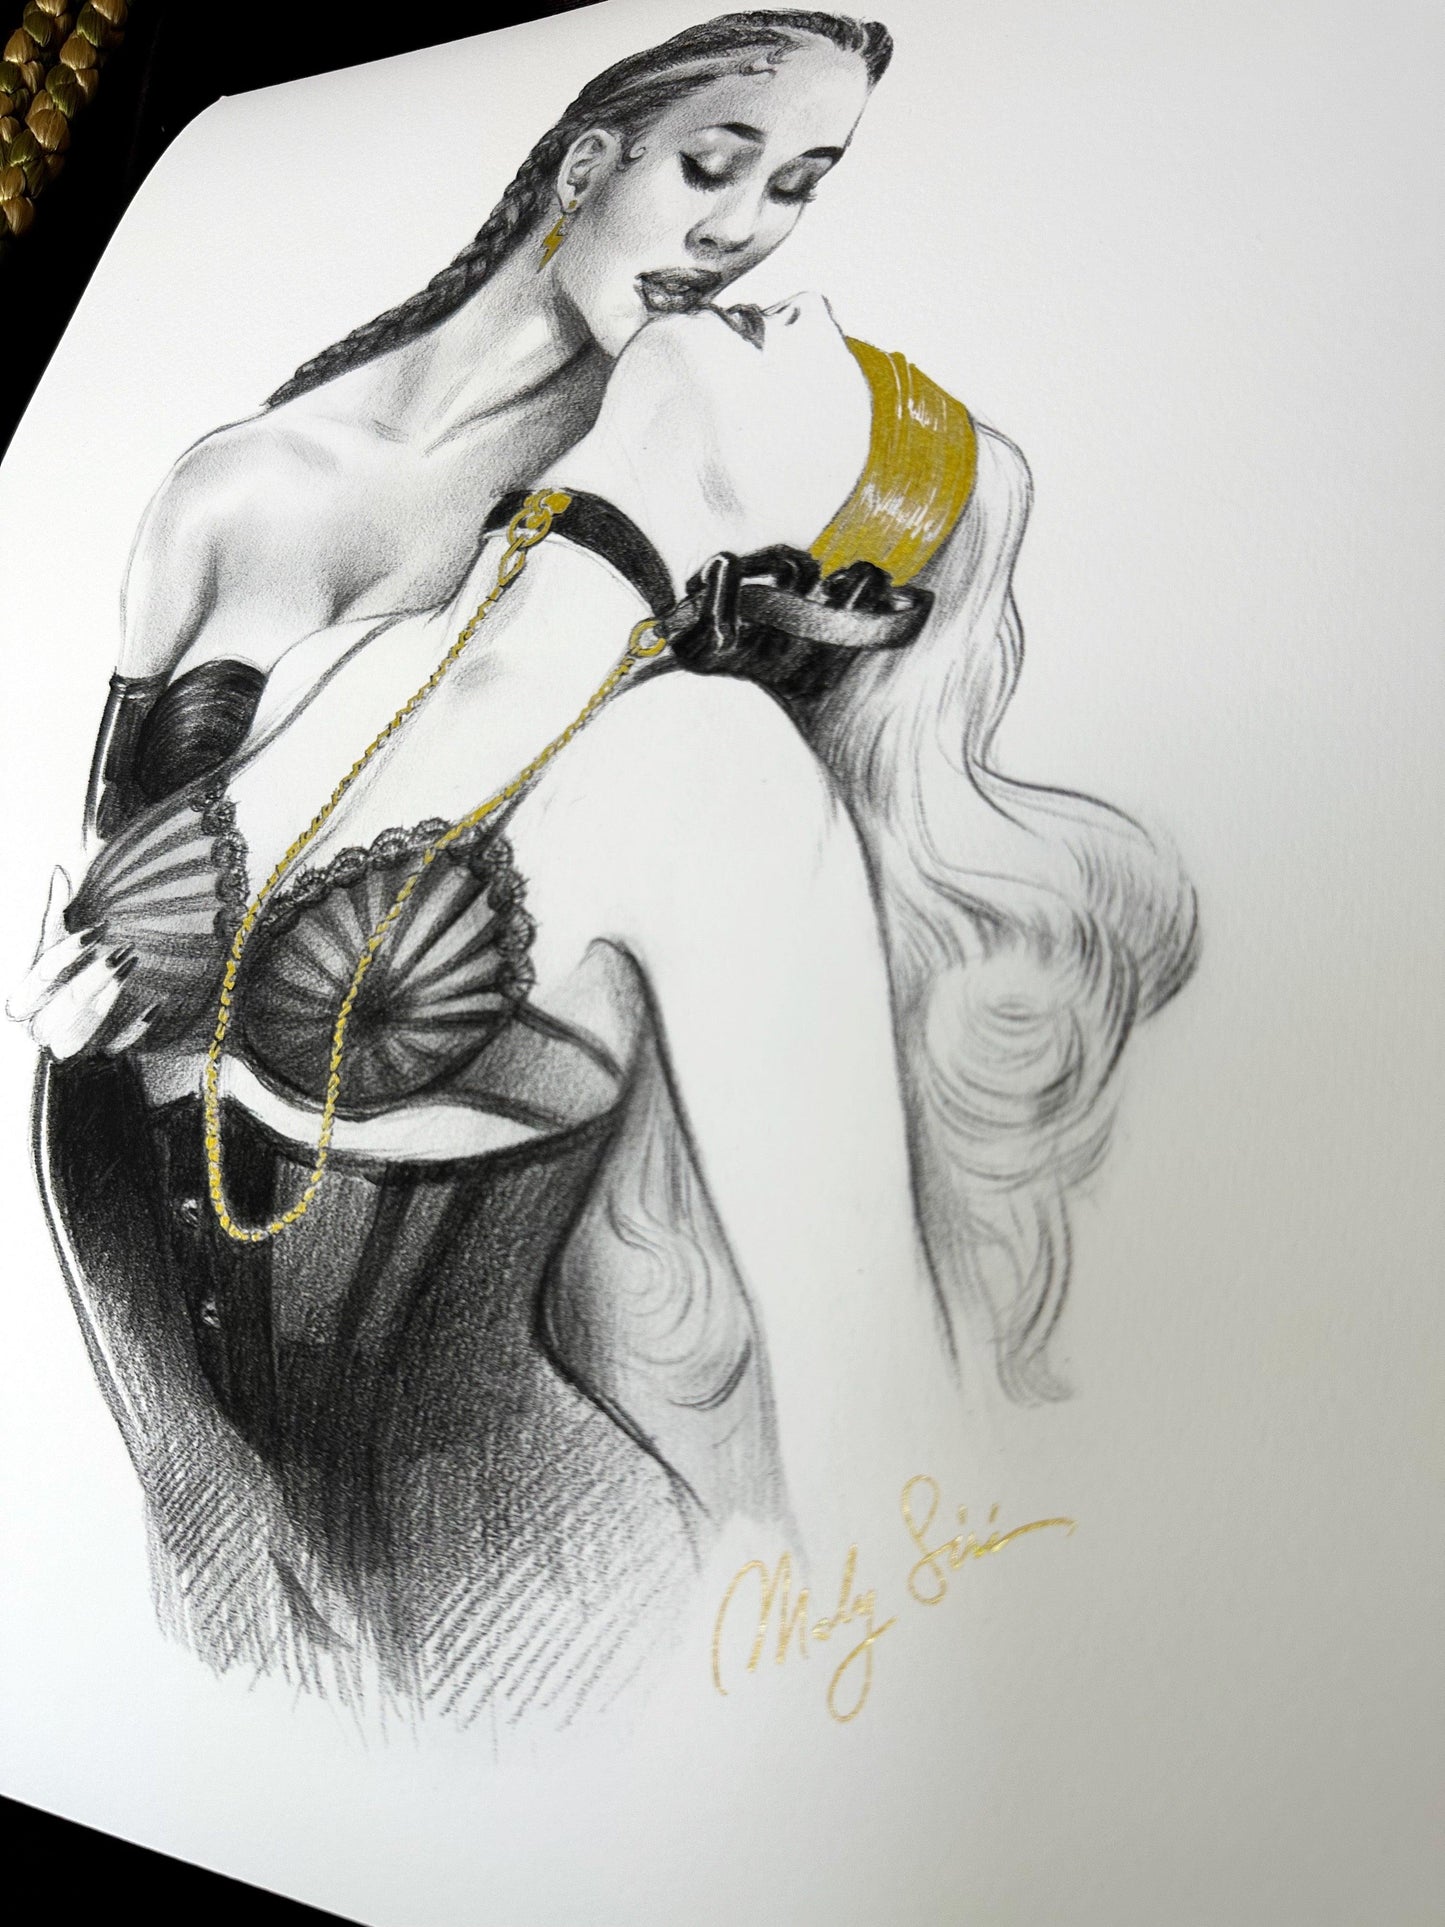 Embellished print, numbered and signed "Under My Spell"